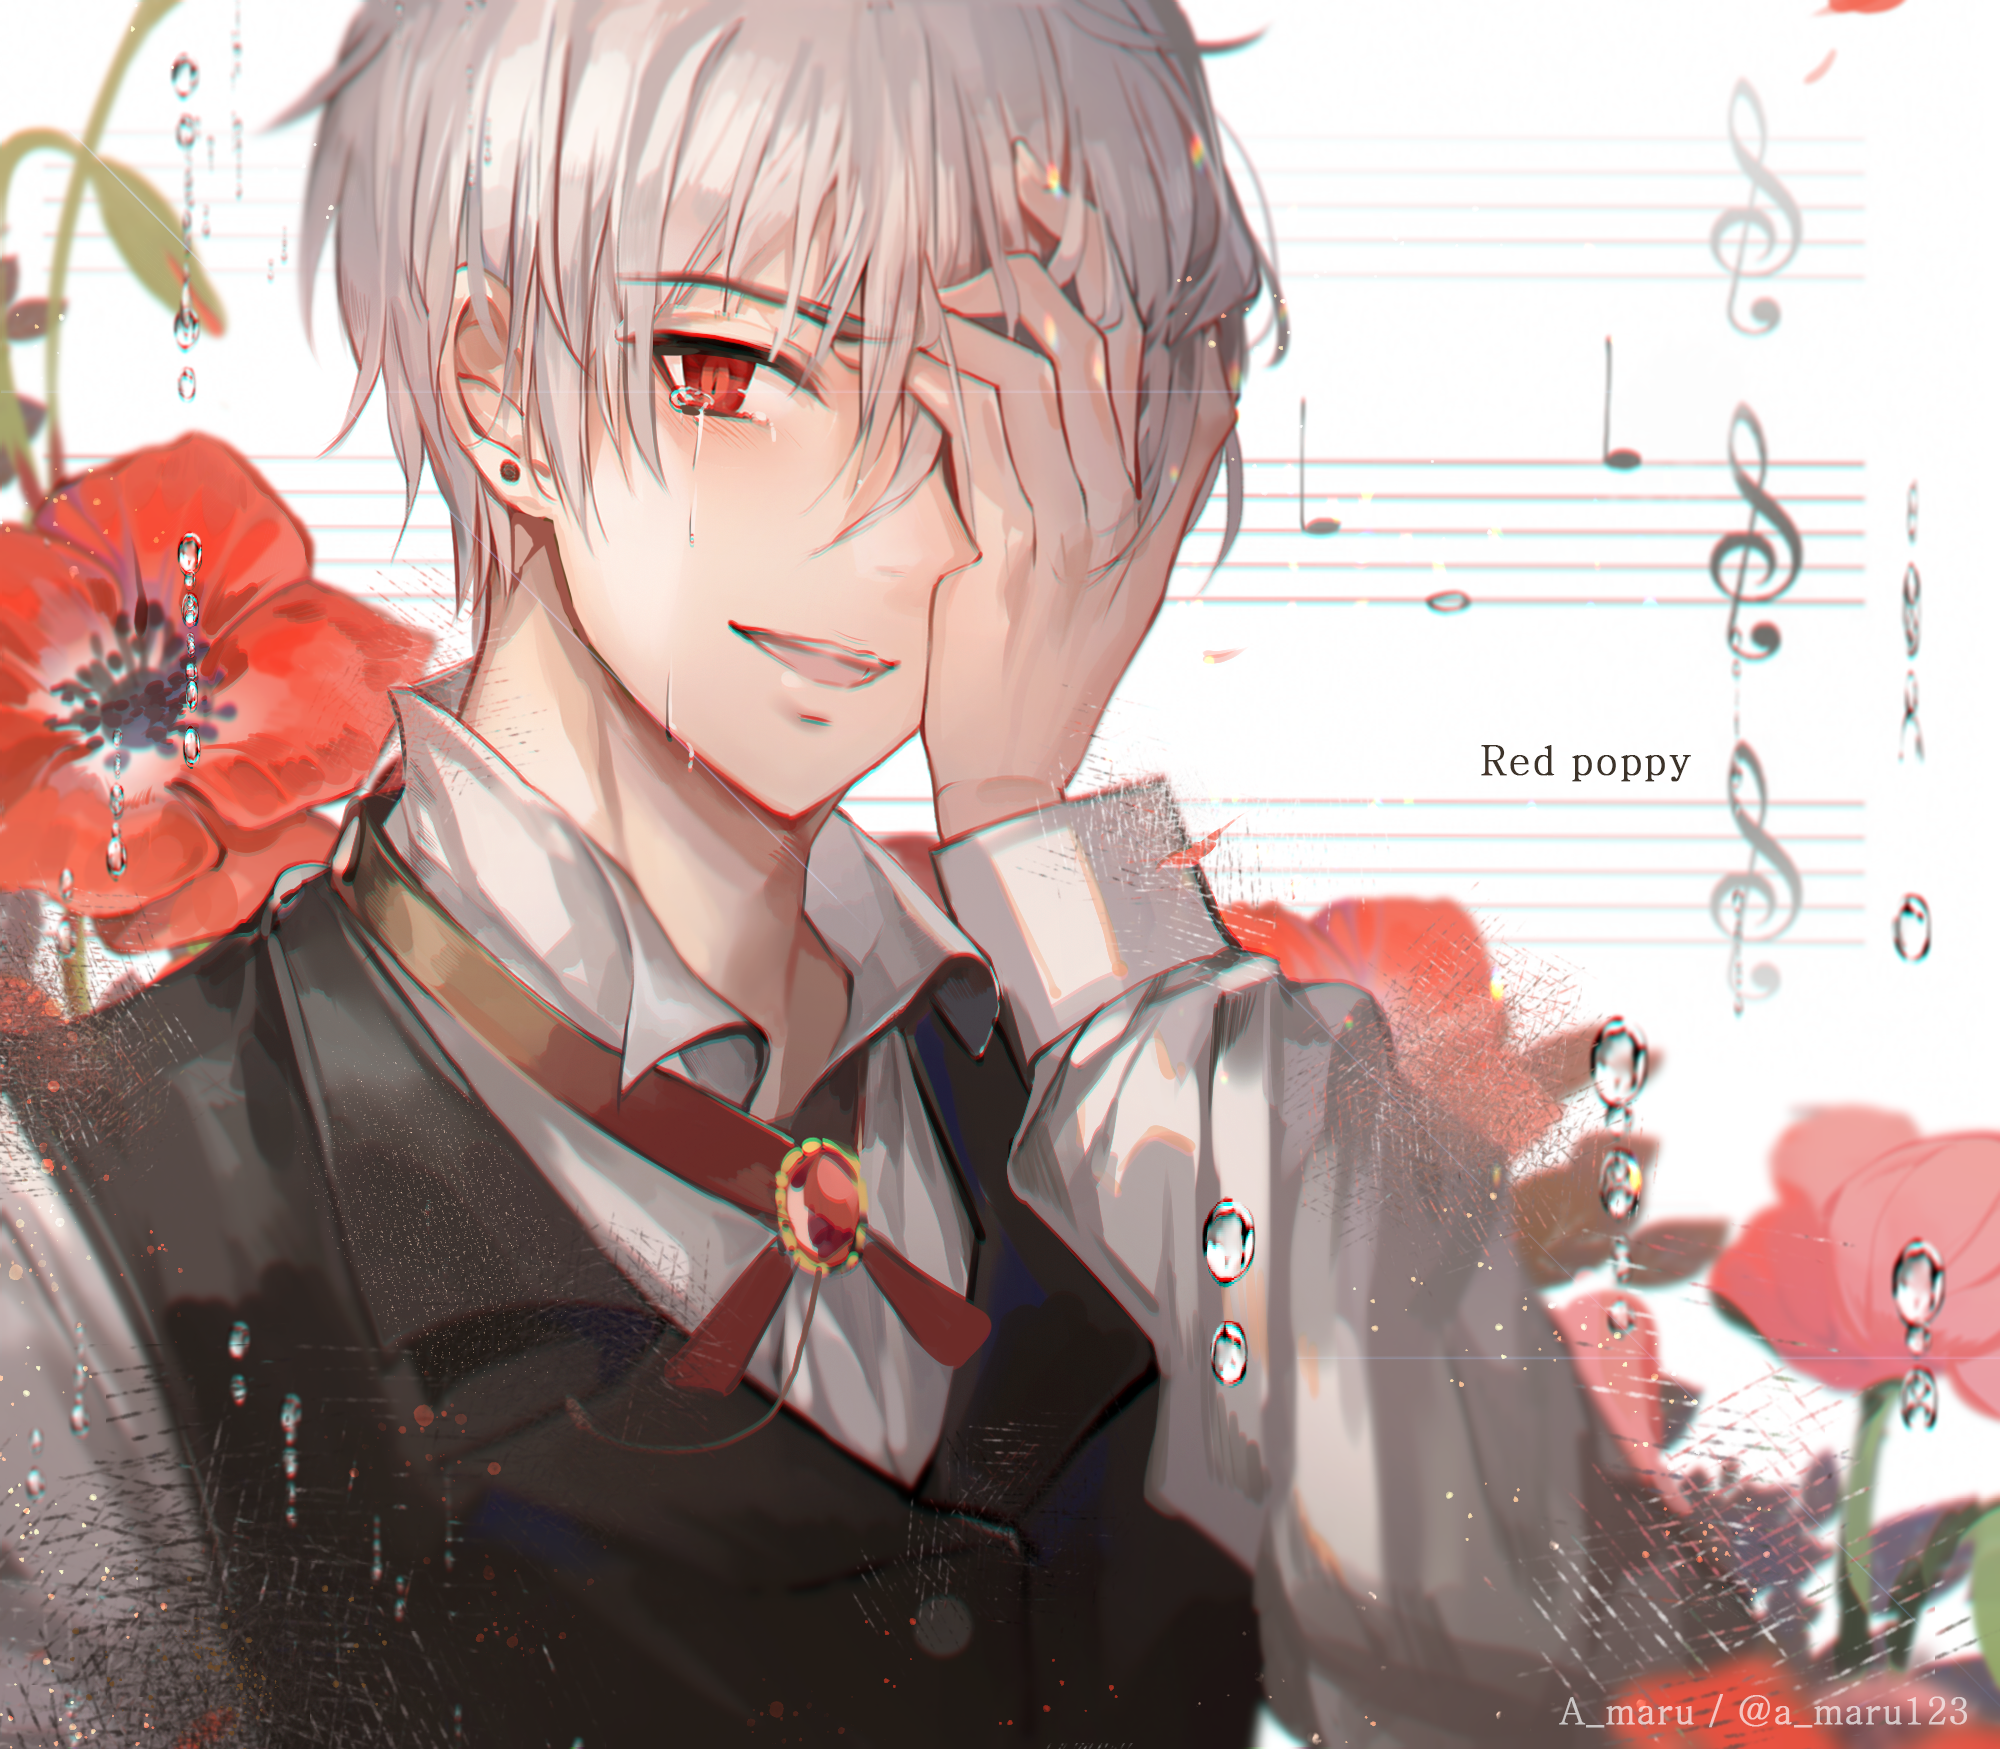 Download 2000x1749 Anime Boy, Crying, Red Eye, Tears, White Hair